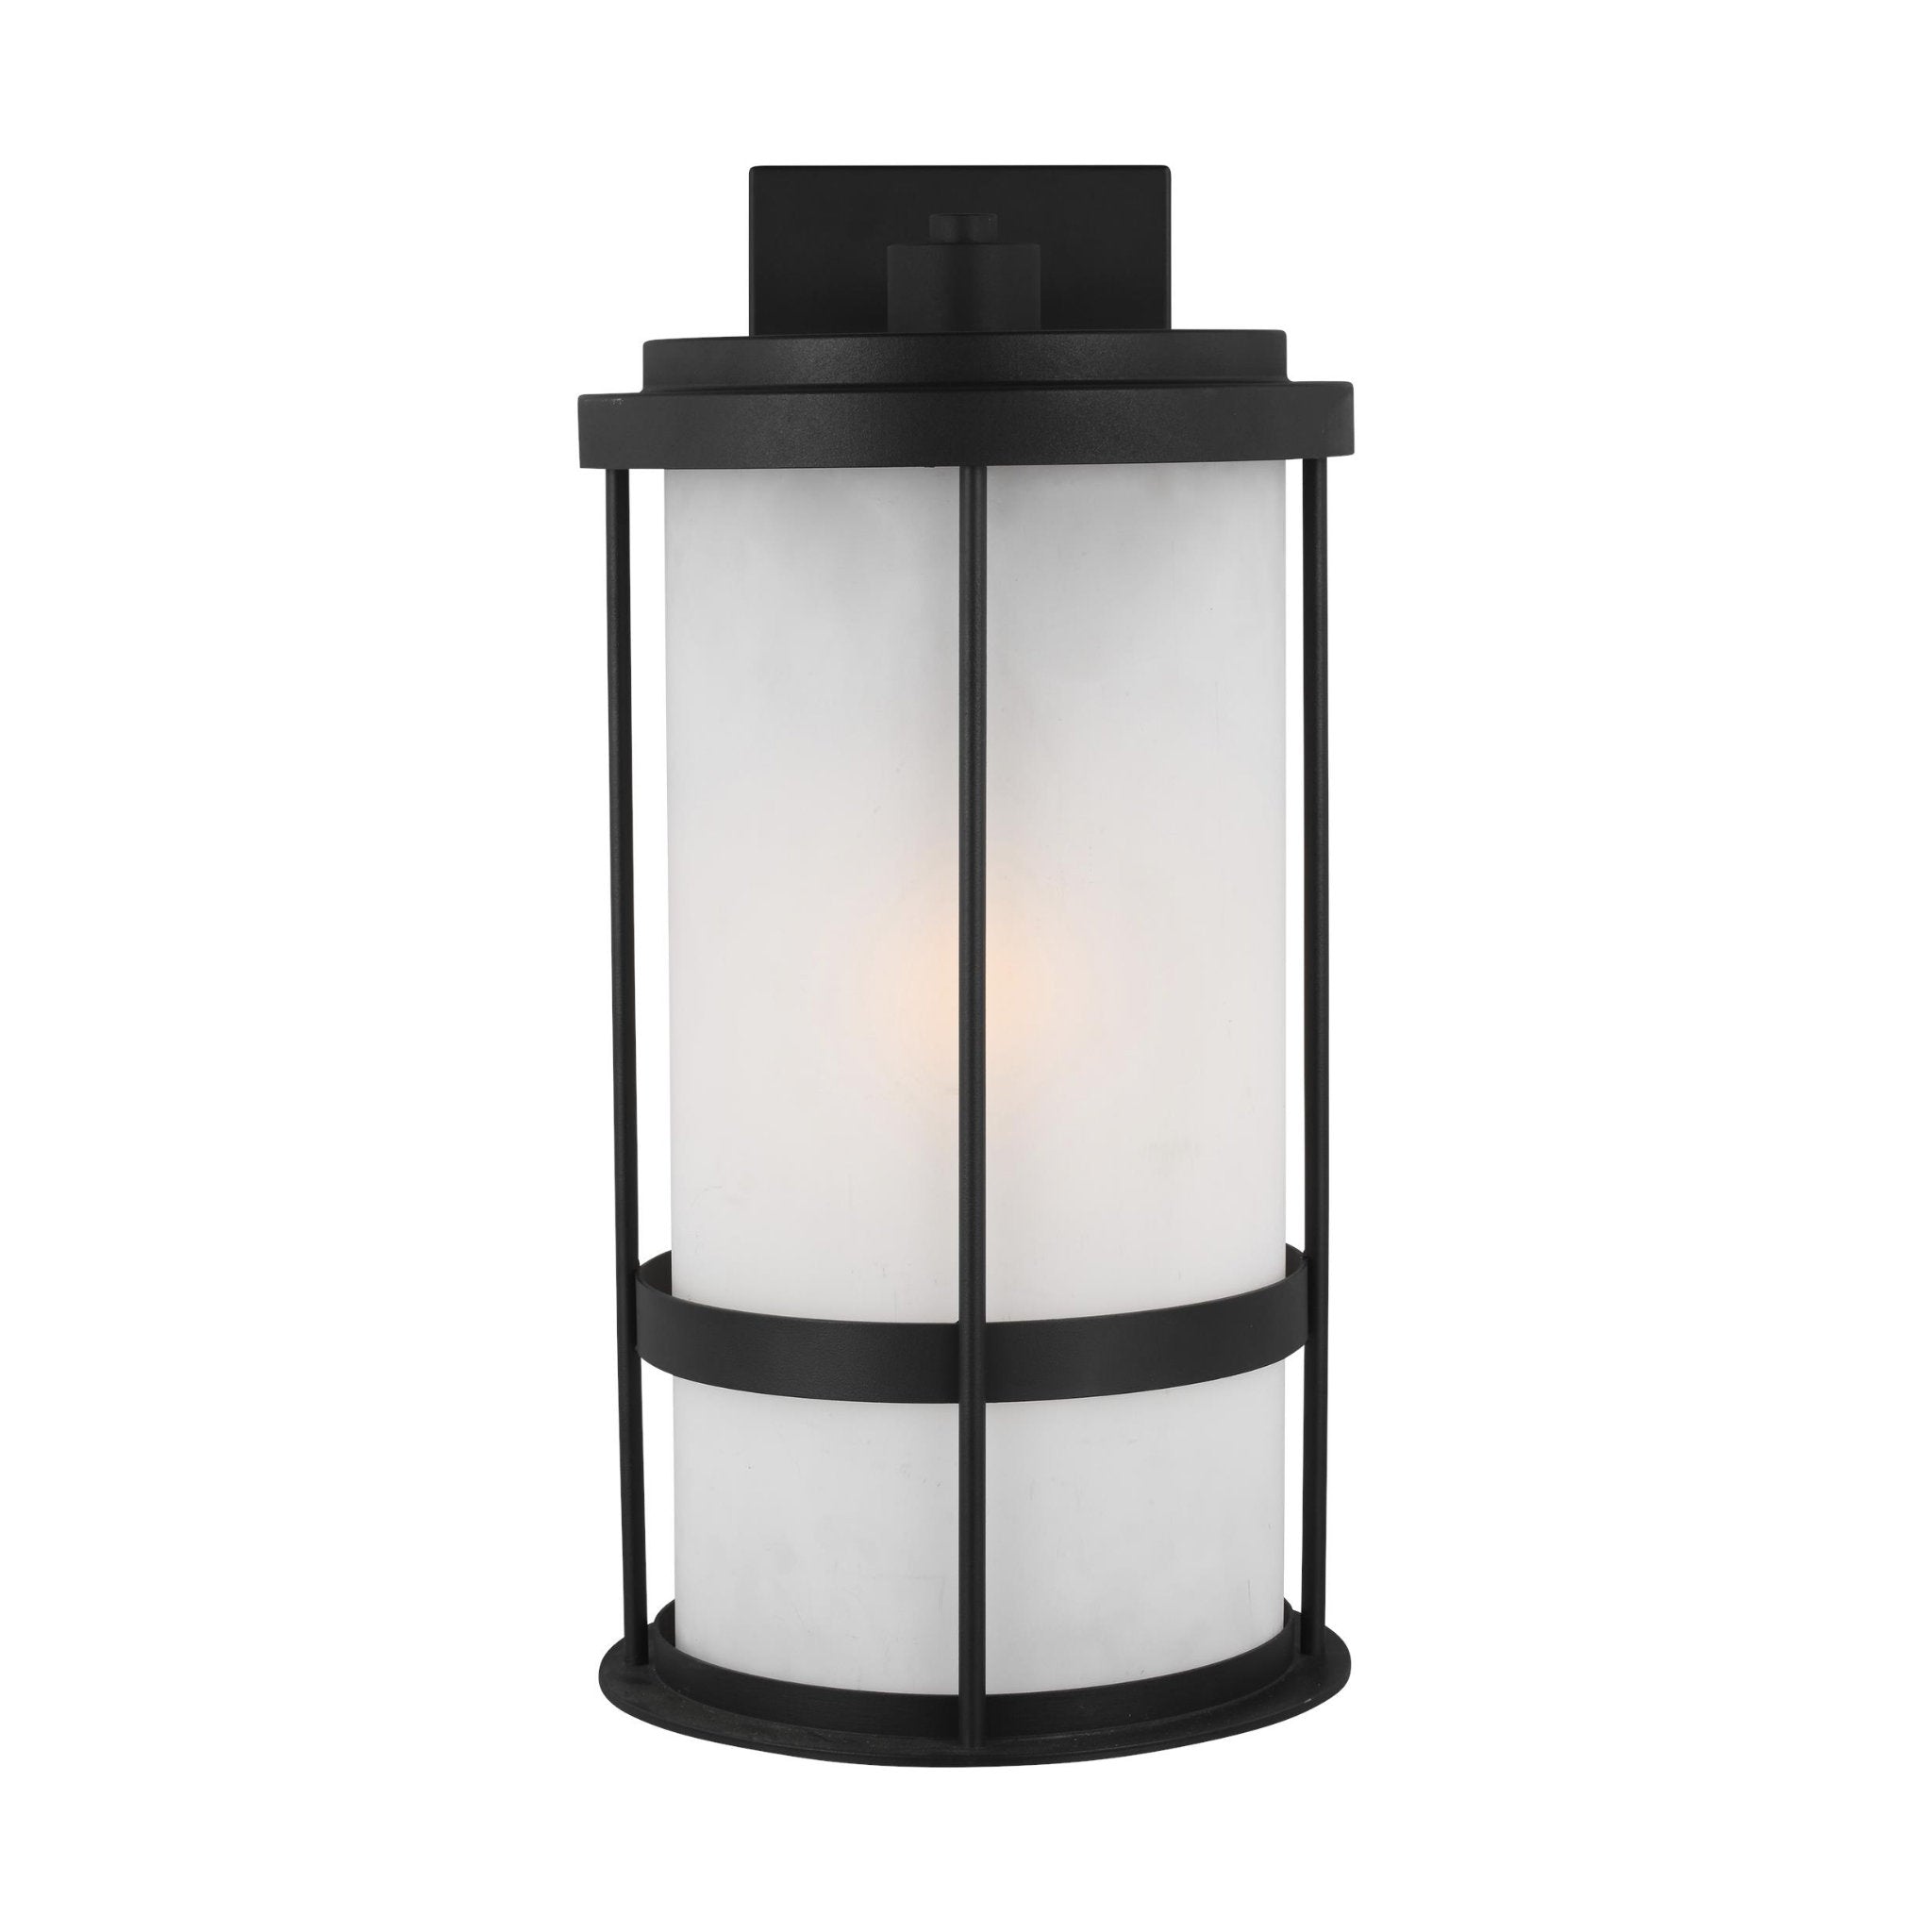 Wilburn Large One Light Outdoor Wall Lantern Transitional Fixture 10" Width 20" Height Aluminum Round Satin Etched Shade in Black